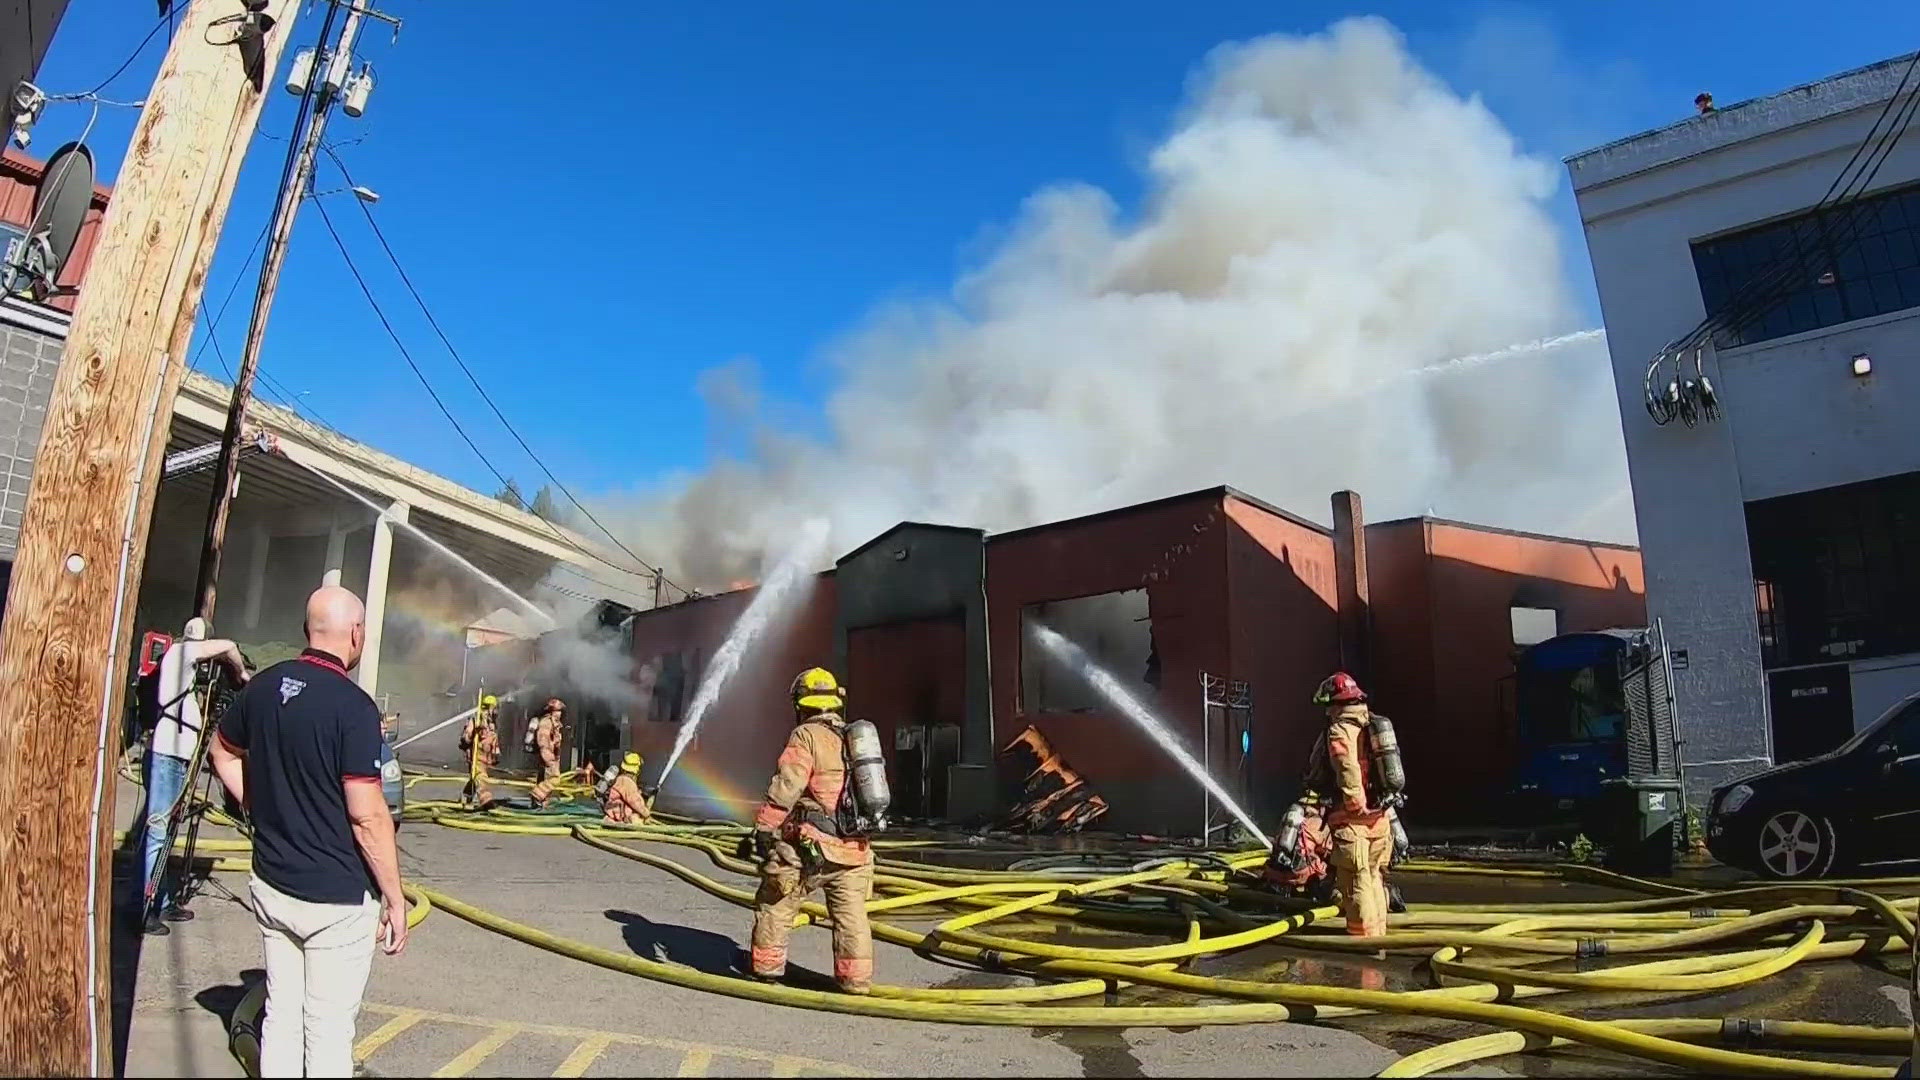 Portland Fire & Rescue responded Monday afternoon after a fire broke out at a warehouse on the east side of the Willamette River, just inside Interstate 5.